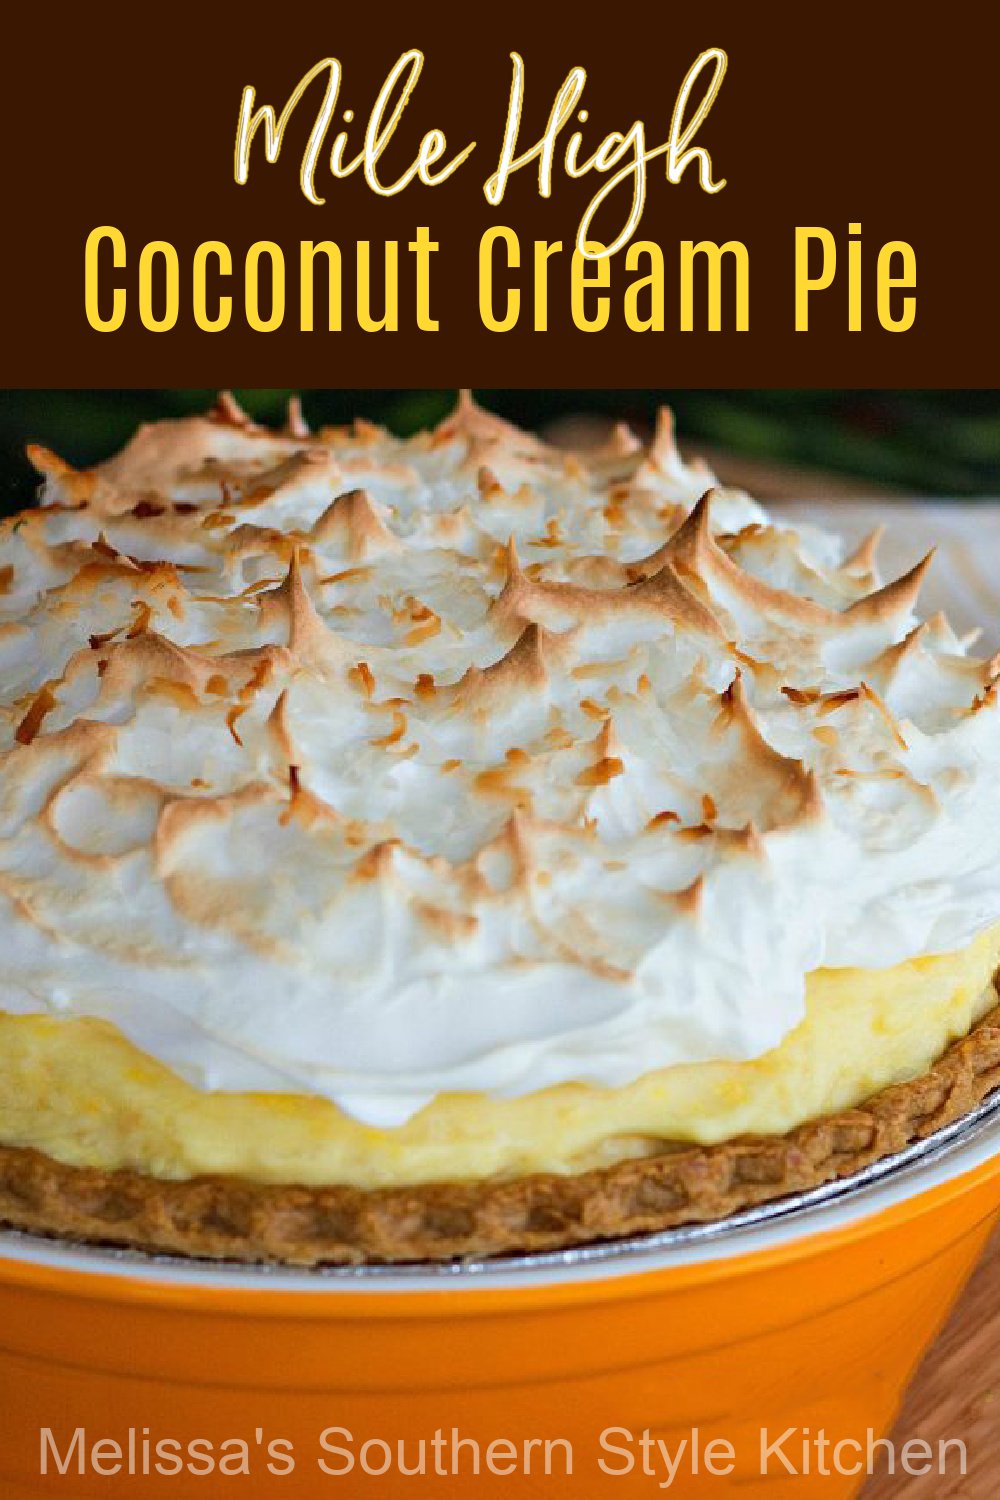 This Mile High Coconut Cream Pie is filled with a dreamy no-bake filling that makes you want to stop and savor each and every bite #coconutcreampie #coconutpie #pierecipes #Southerncoconutcreampie #pies #southernrecipes #milehighcoconutcreampie